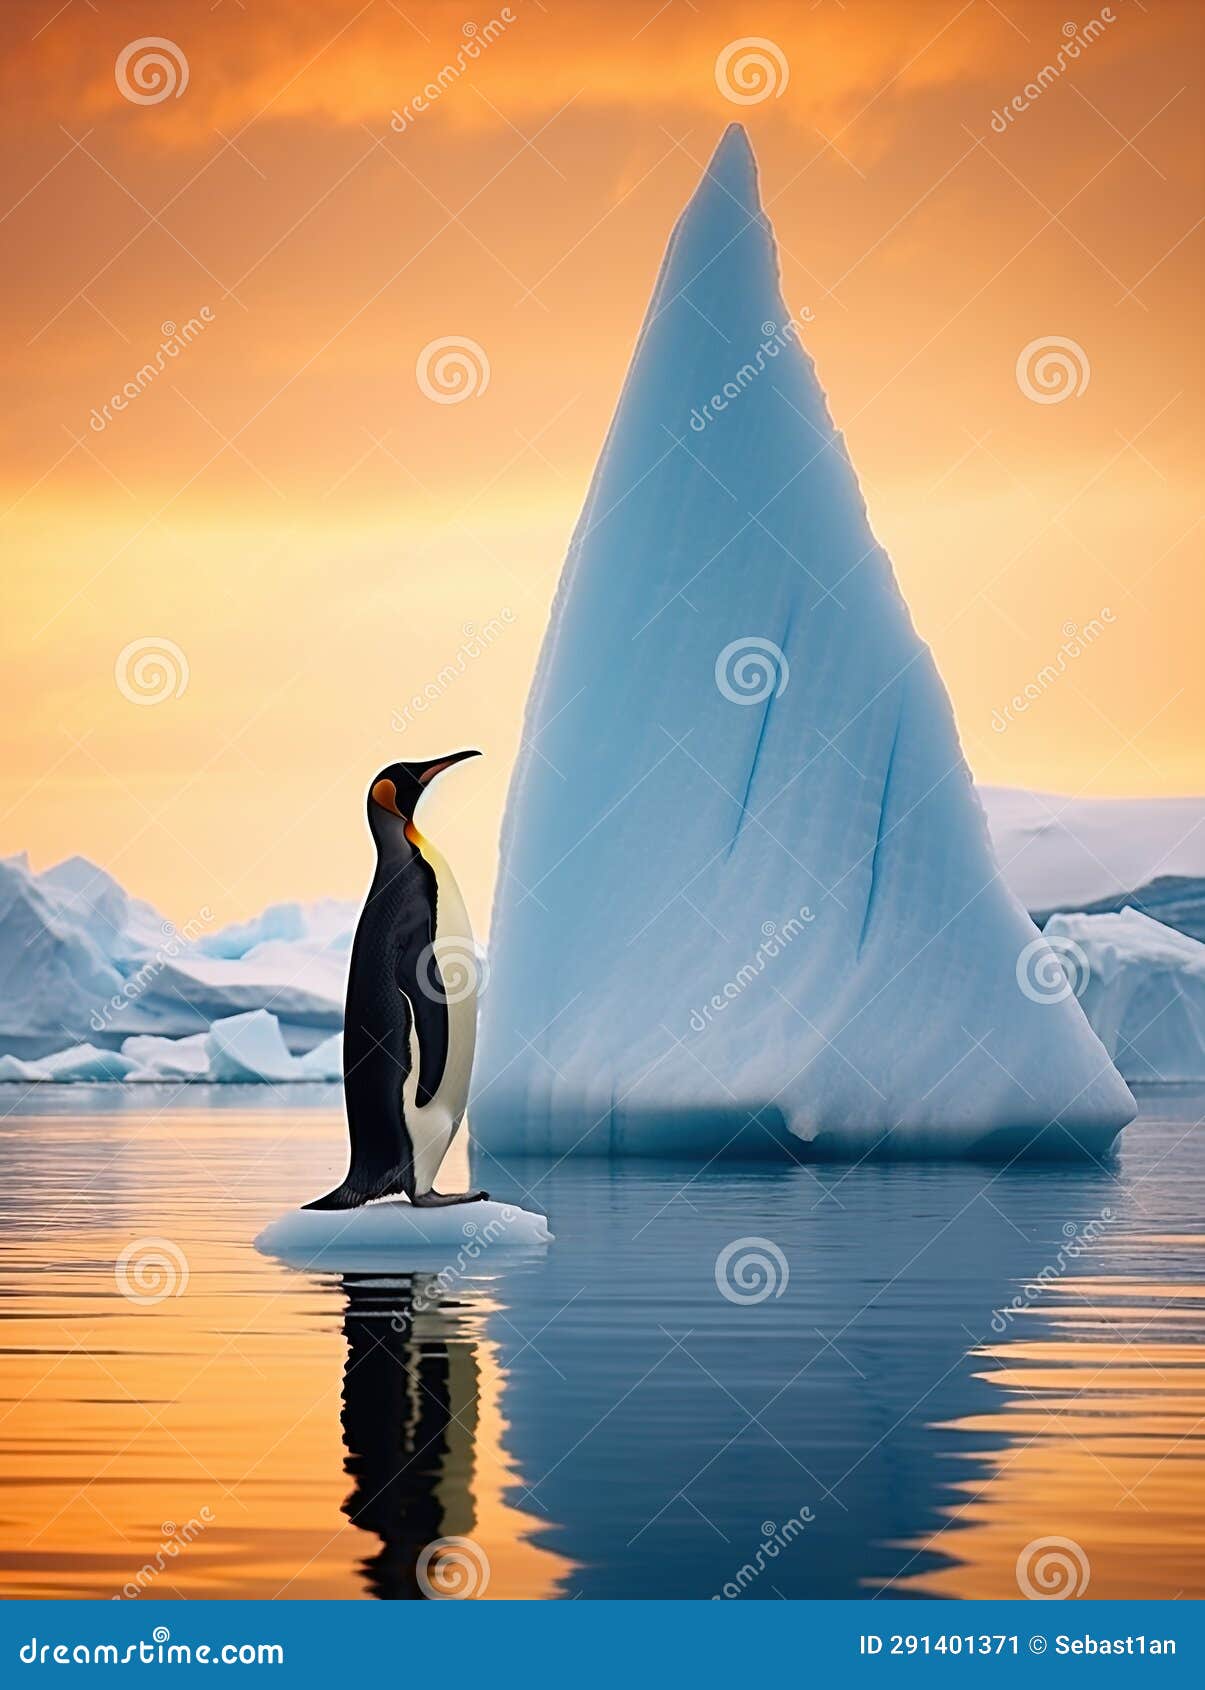 solitary penguin standing on ice with the vast waters and an orange-hued sky in the background.